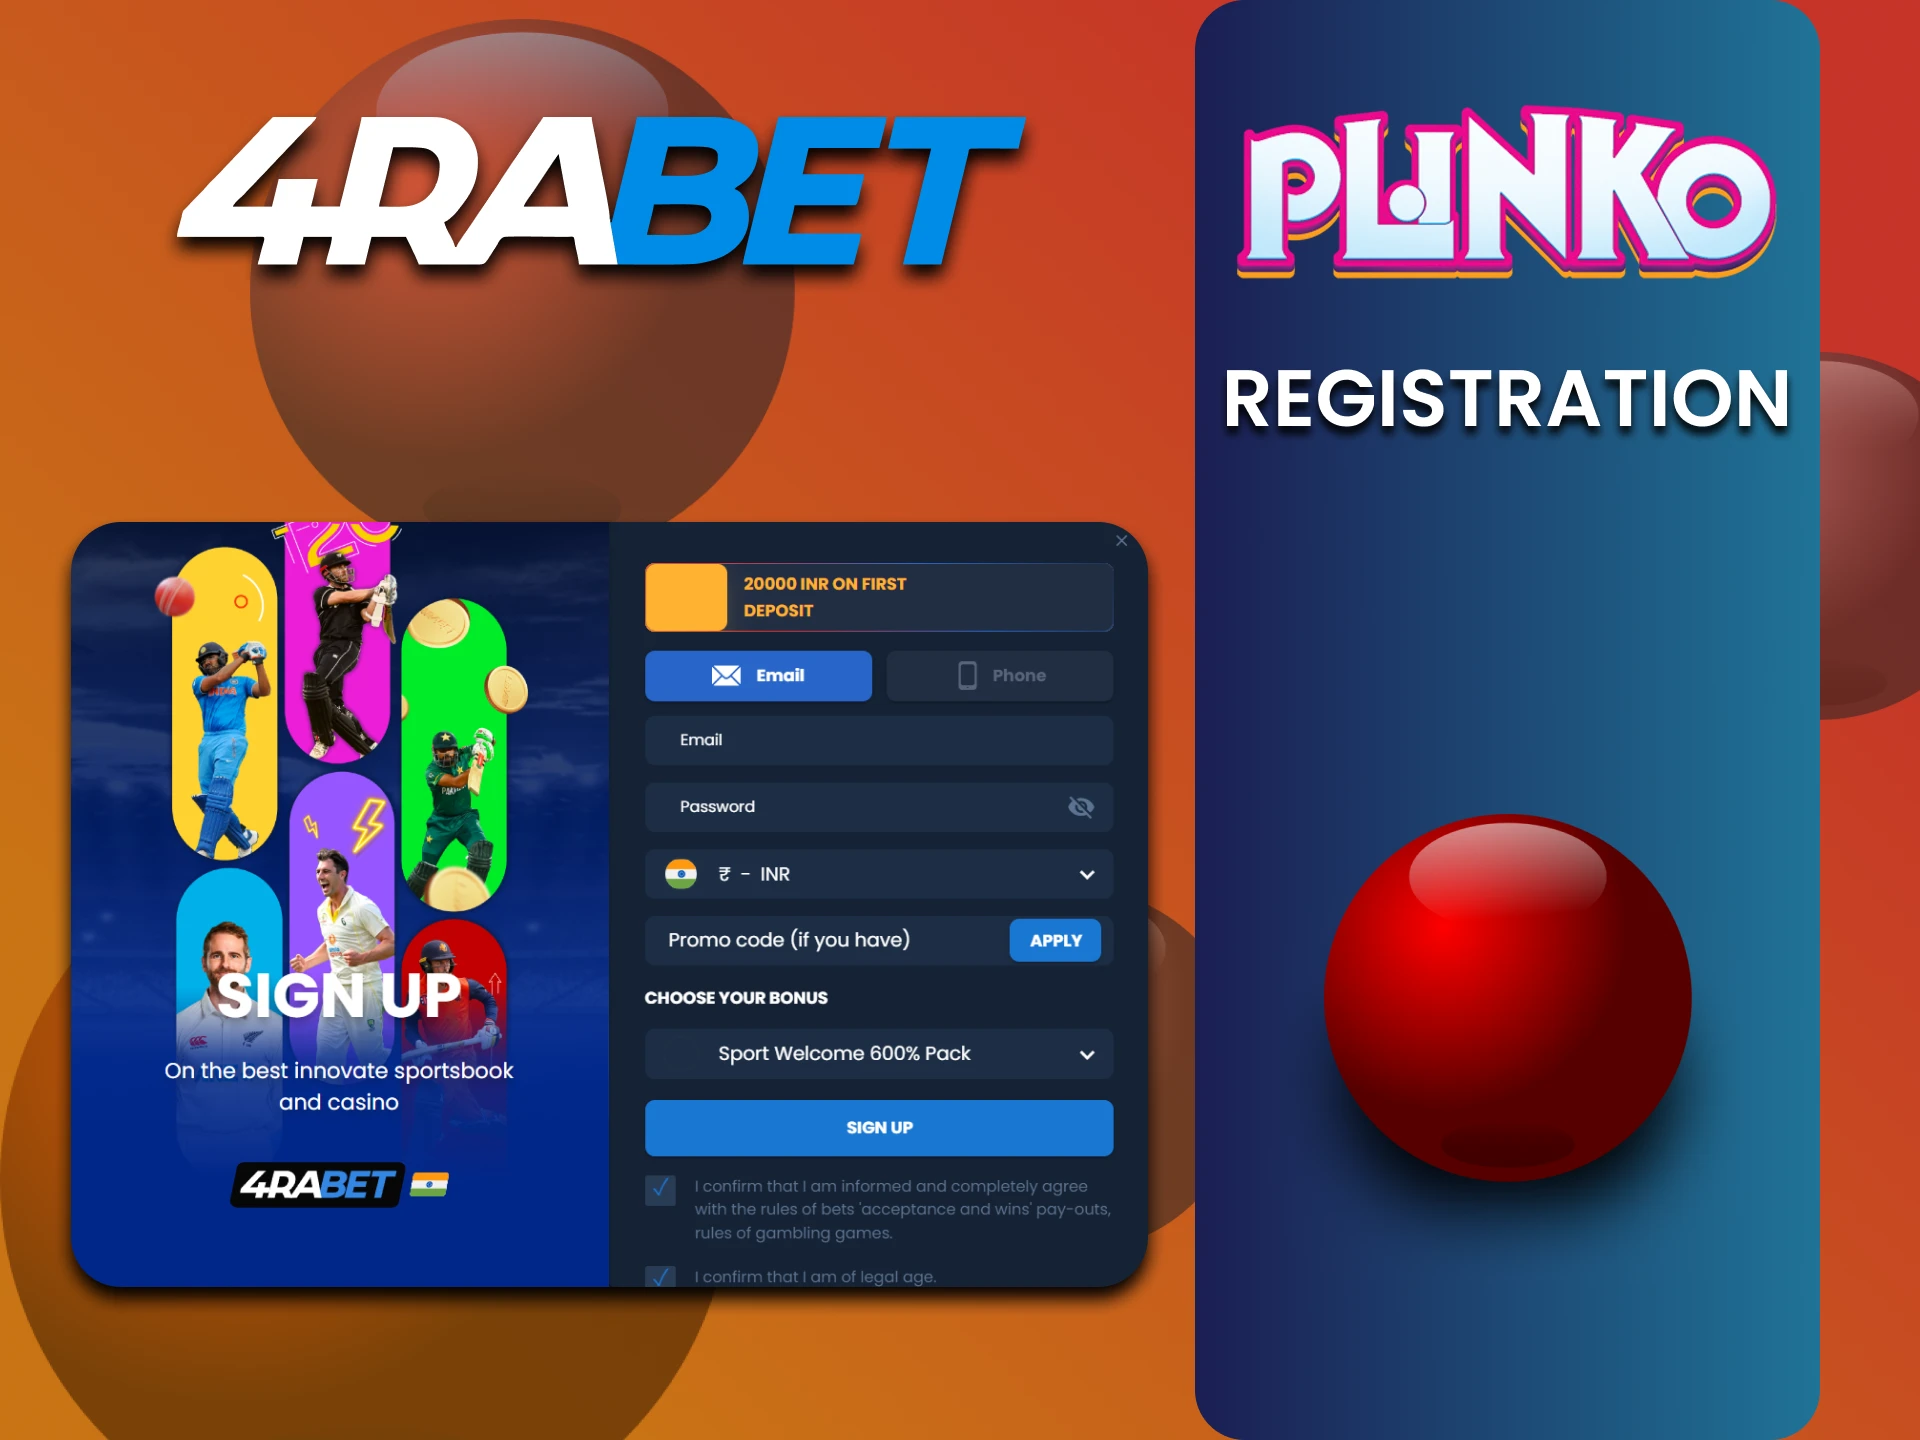 At 4rabet website to play Plinko, make an easy registration.